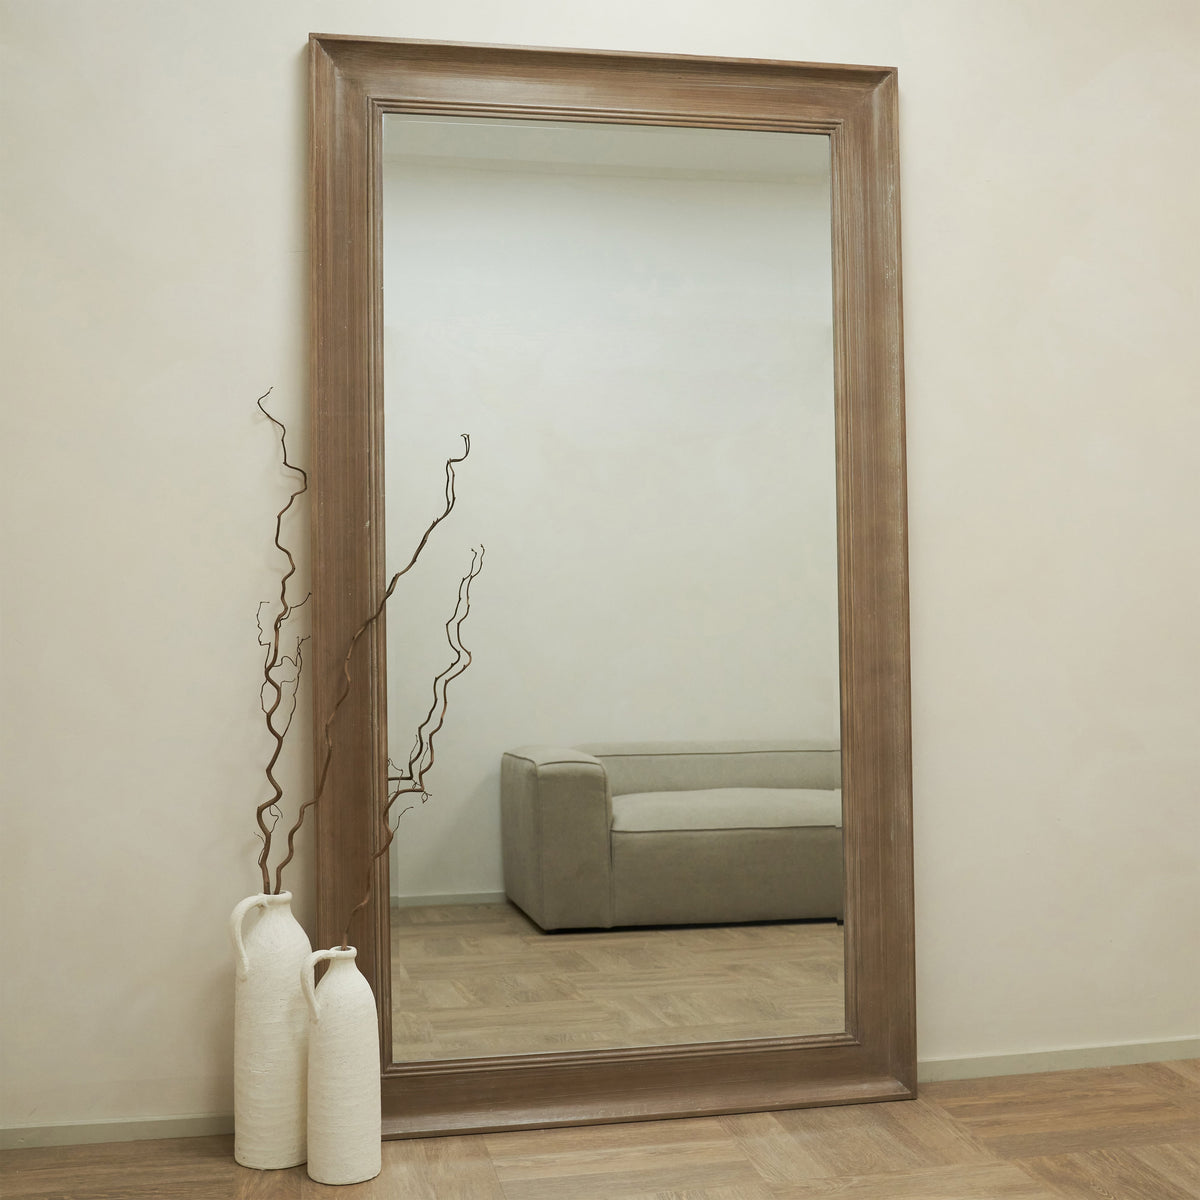 Extra Large Full Length Washed Wood Mirror leaning against wall